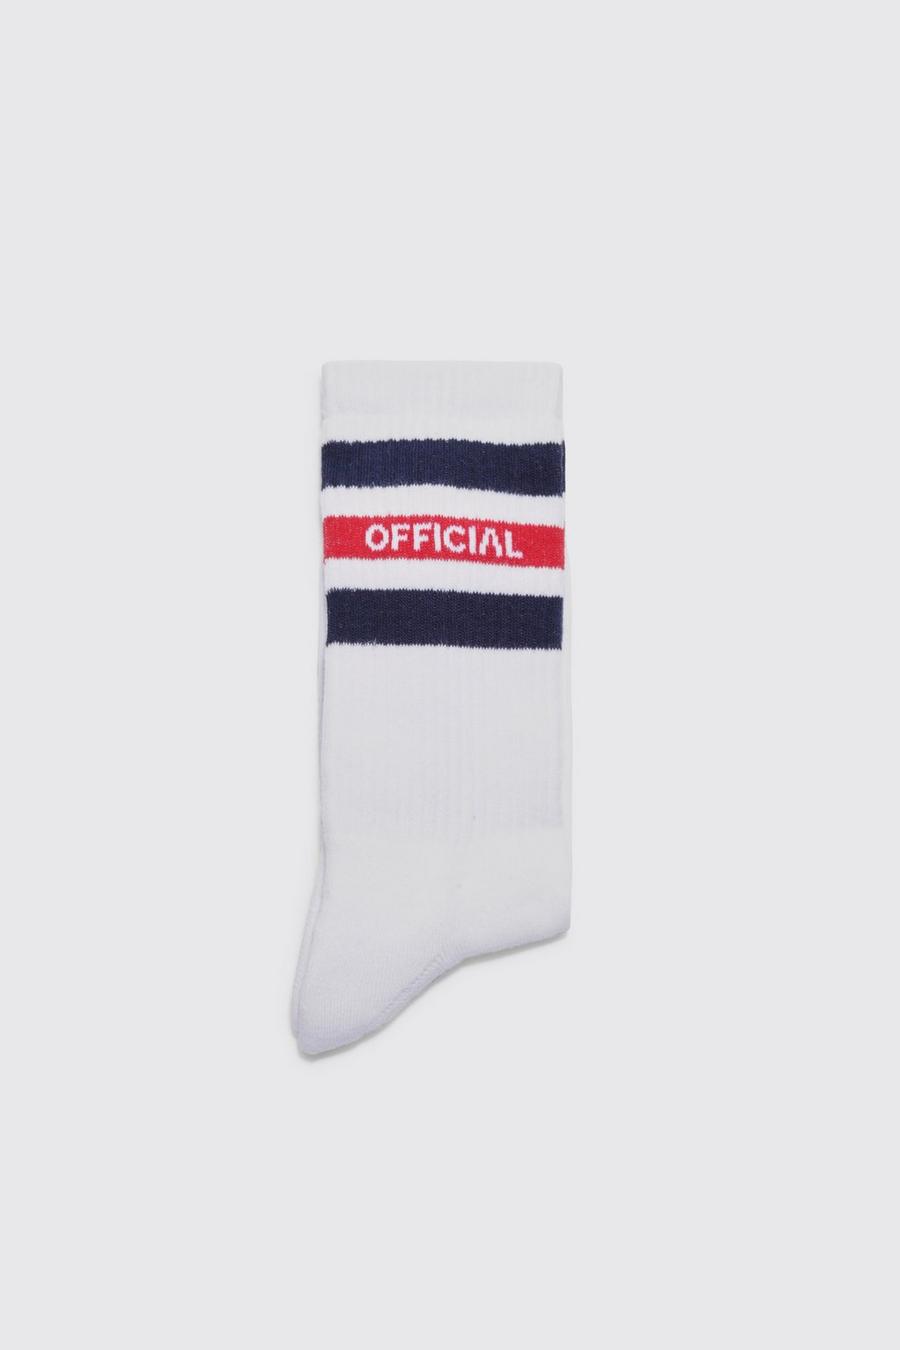 Chaussettes à rayures - Official, White blanc